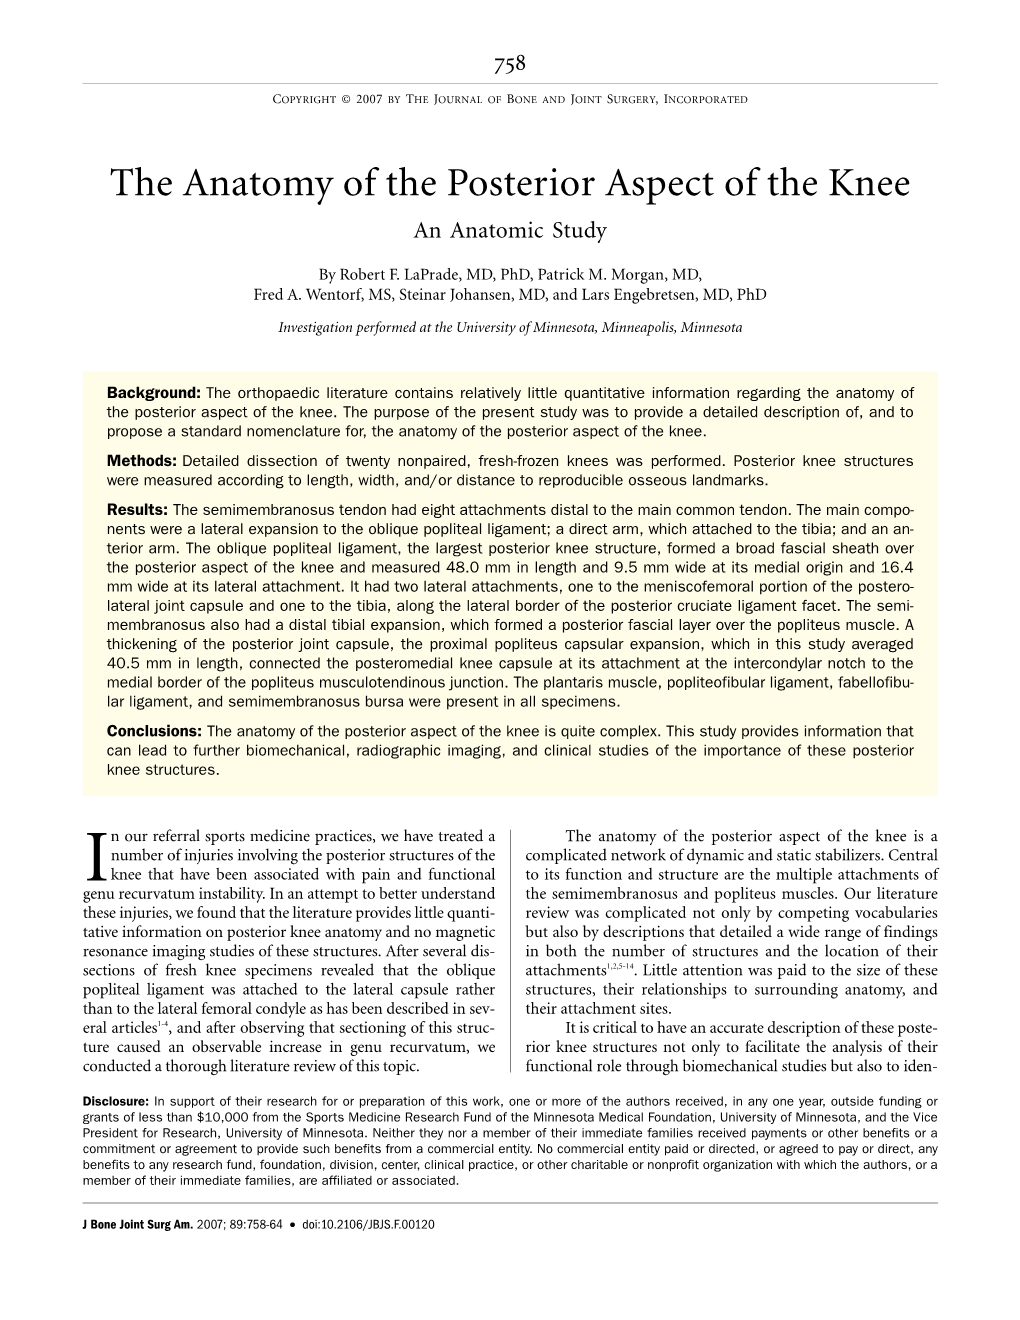 The Anatomy of the Posterior Aspect of the Knee. an Anatomic Study ...